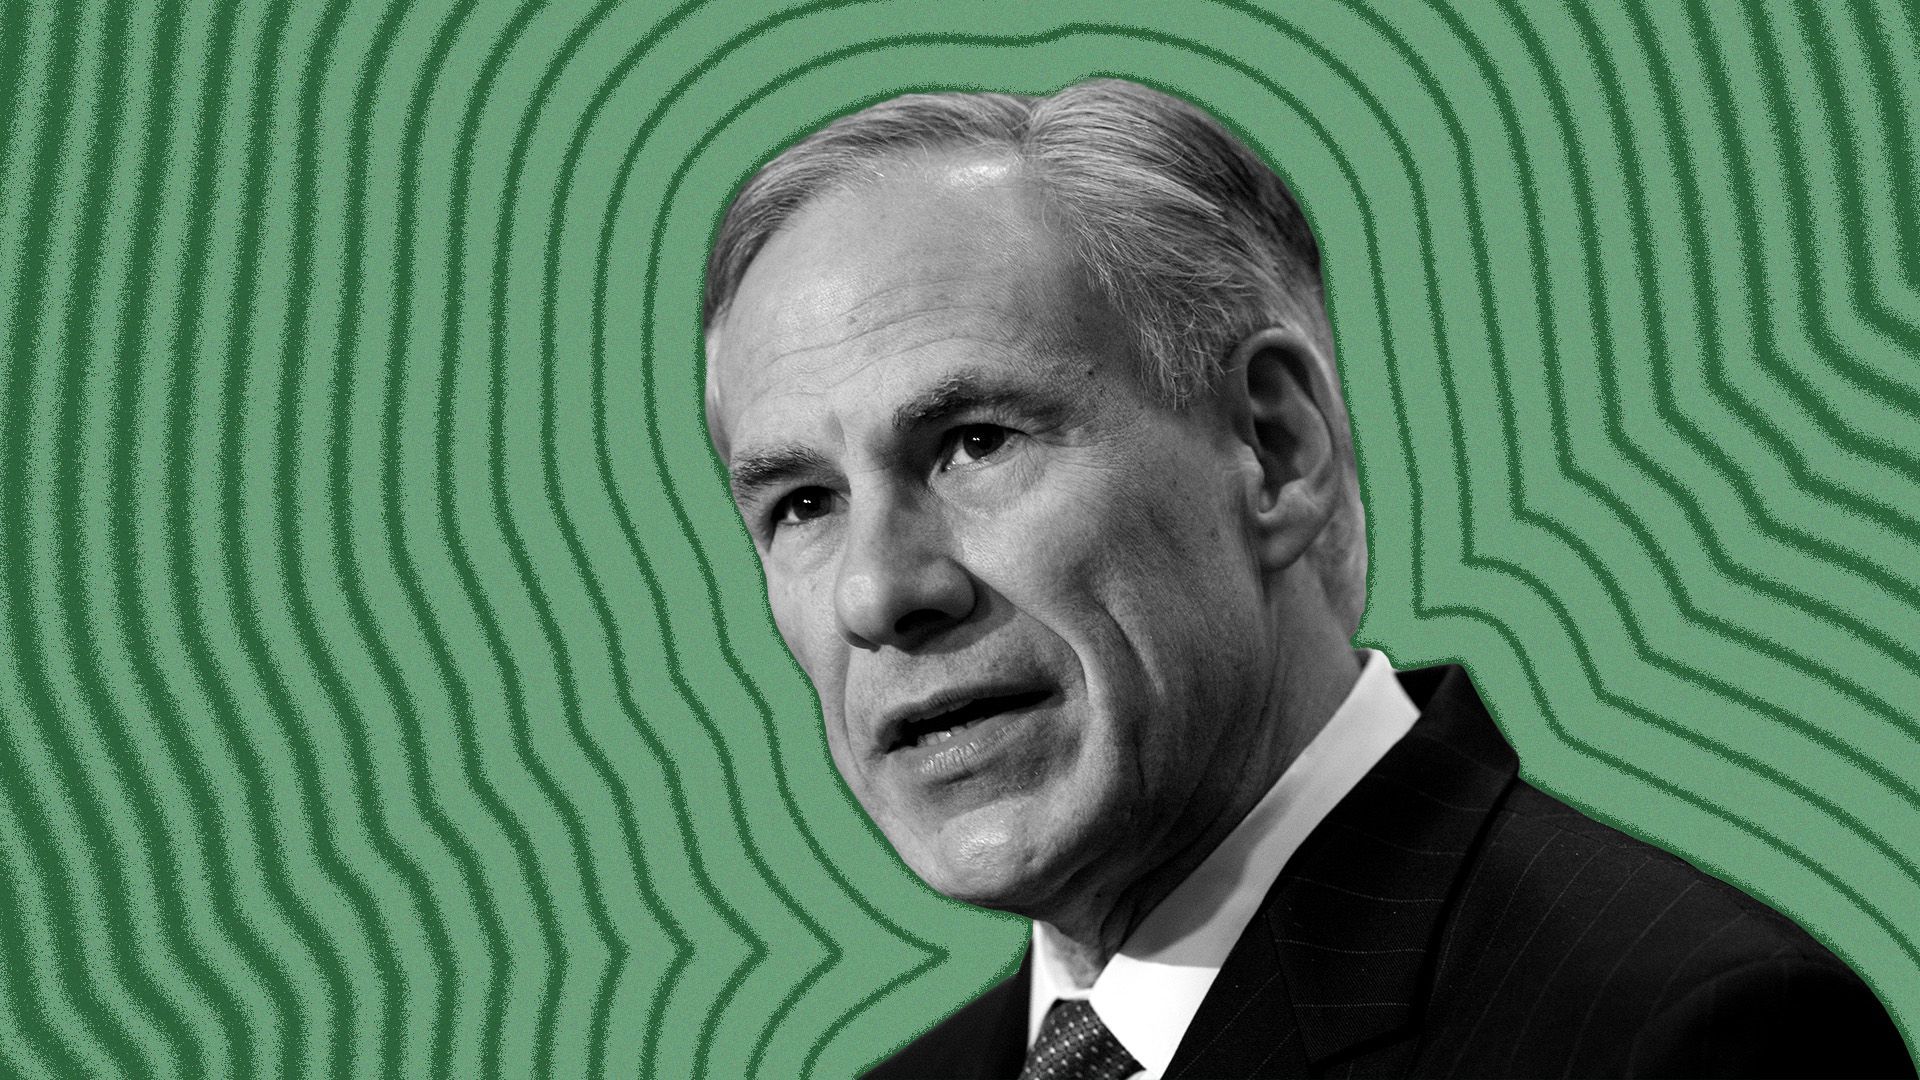 Photo illustration of Texas Governor Greg Abbott with lines radiating from him.